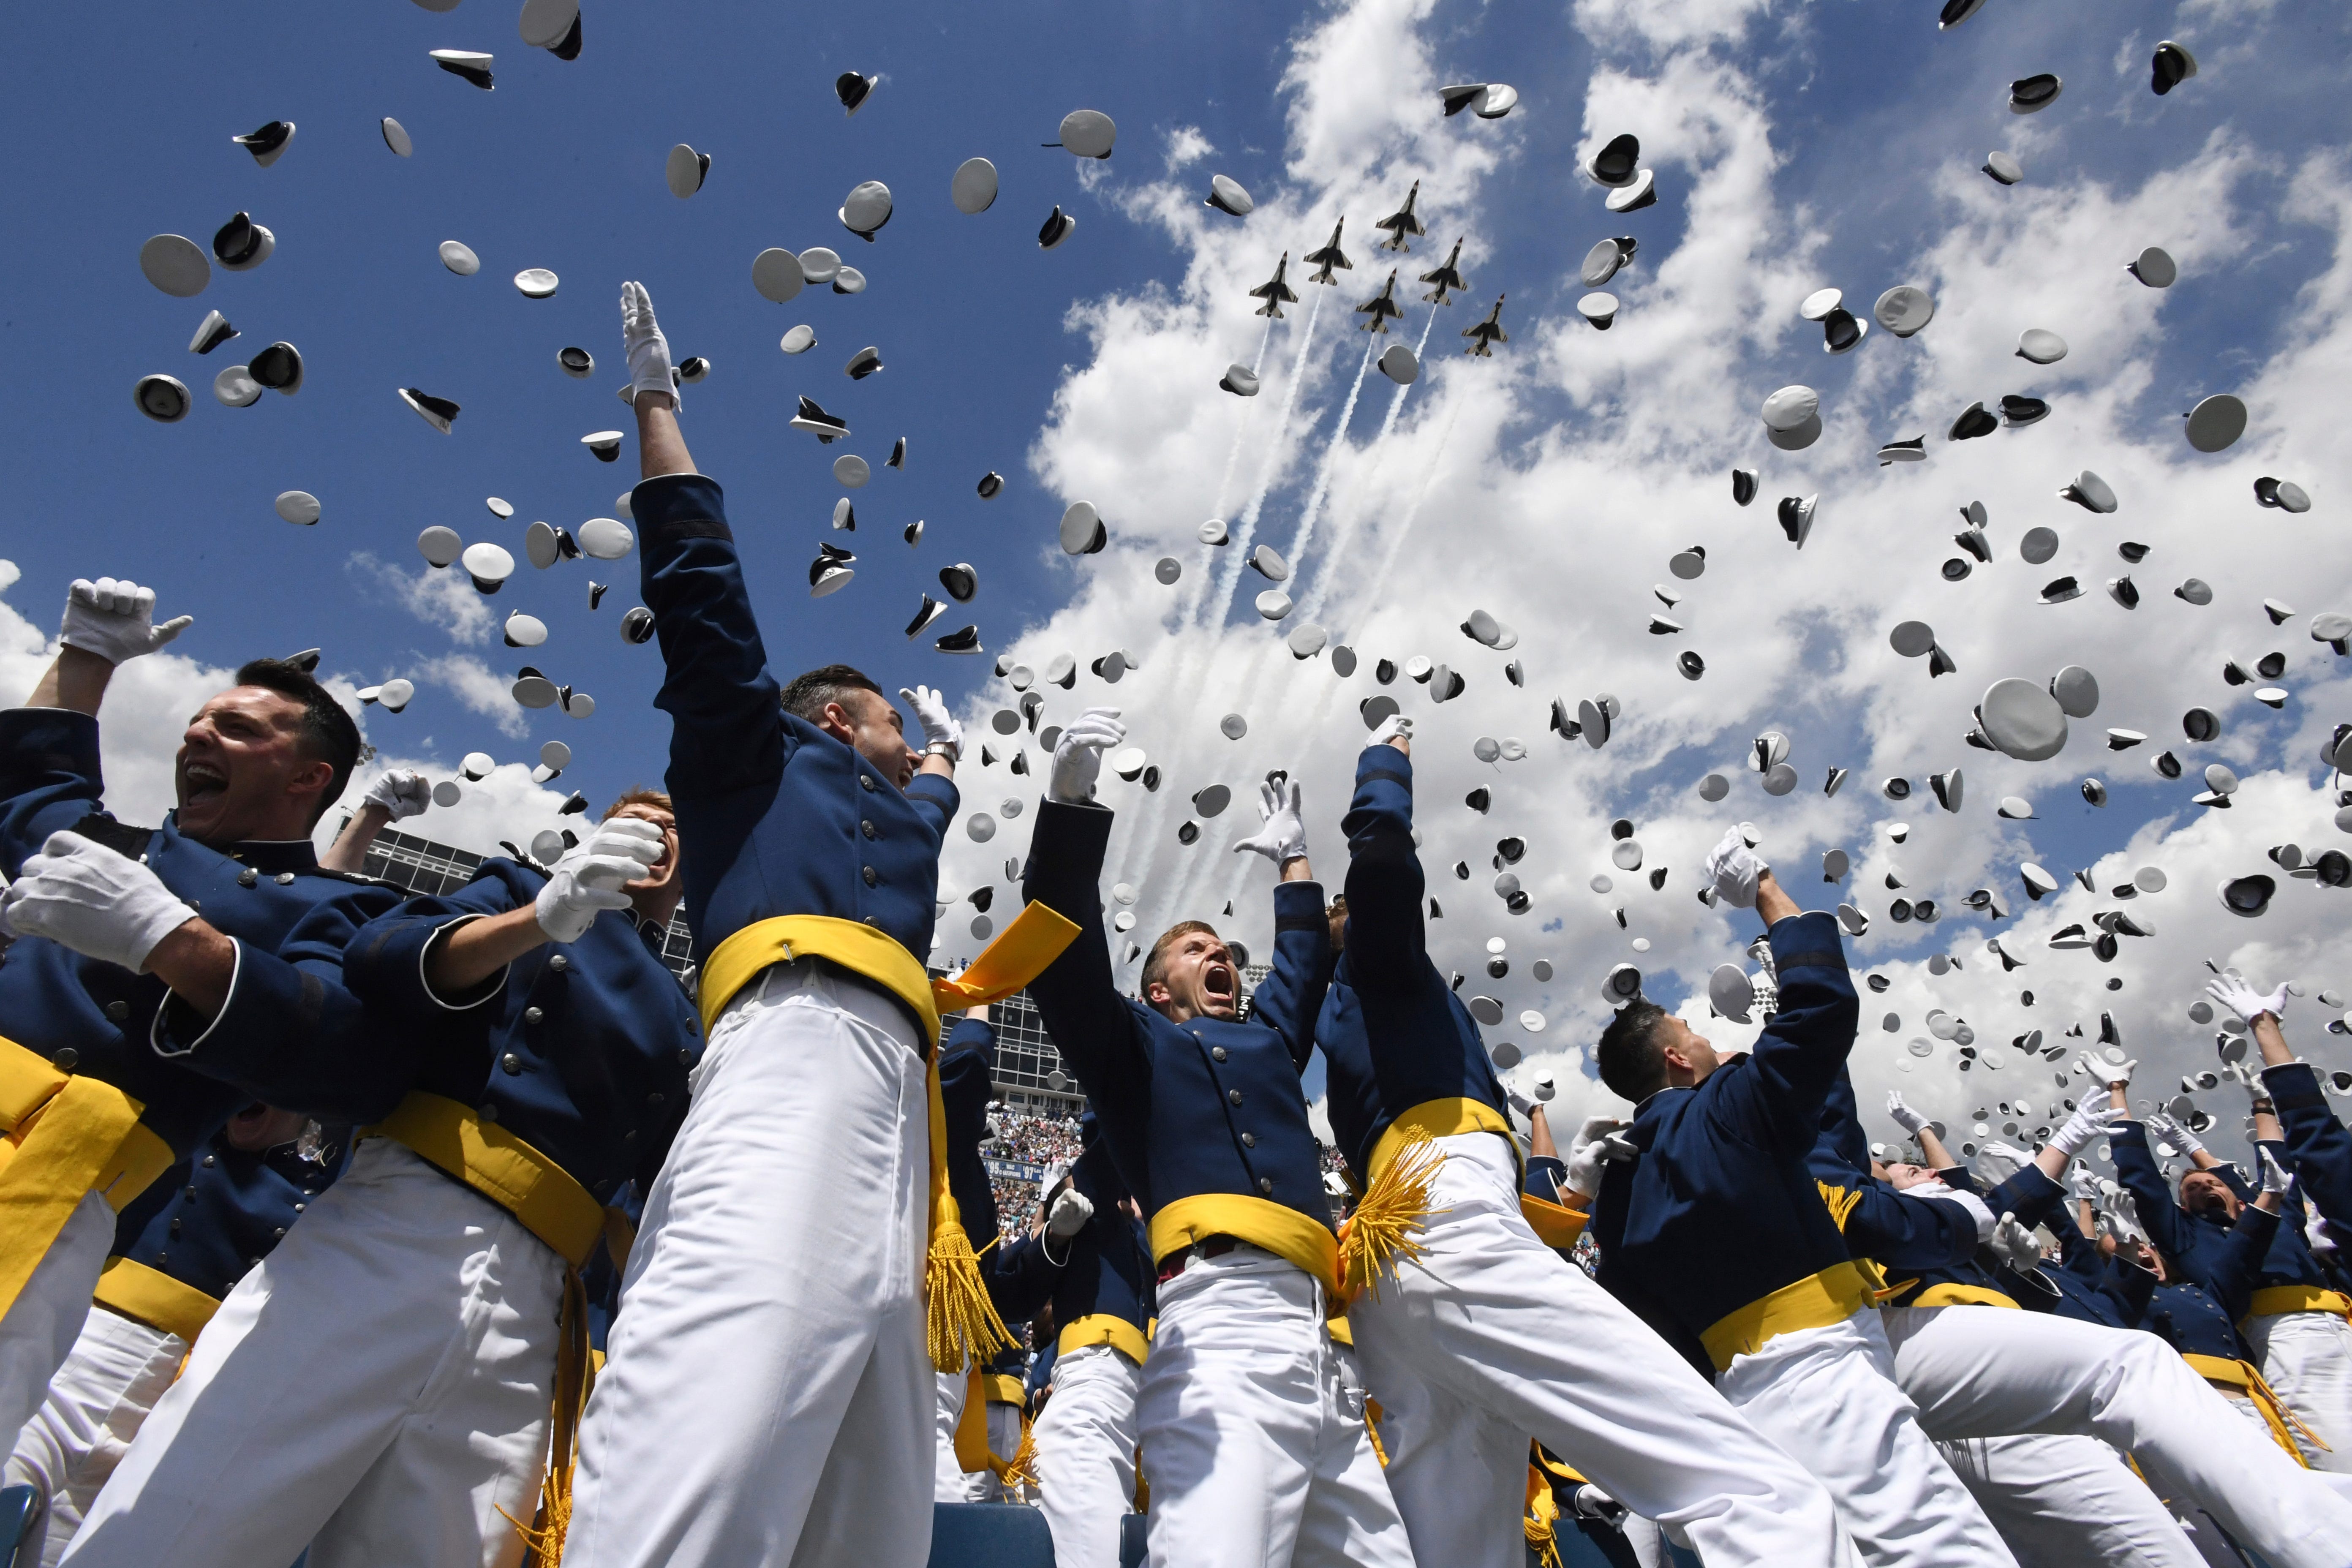 U.S. Air Force Academy cadets toss their hats in the air as the Thunderbirds fly overhead during the cadets' graduation ceremony in Colorado Springs, Colo.